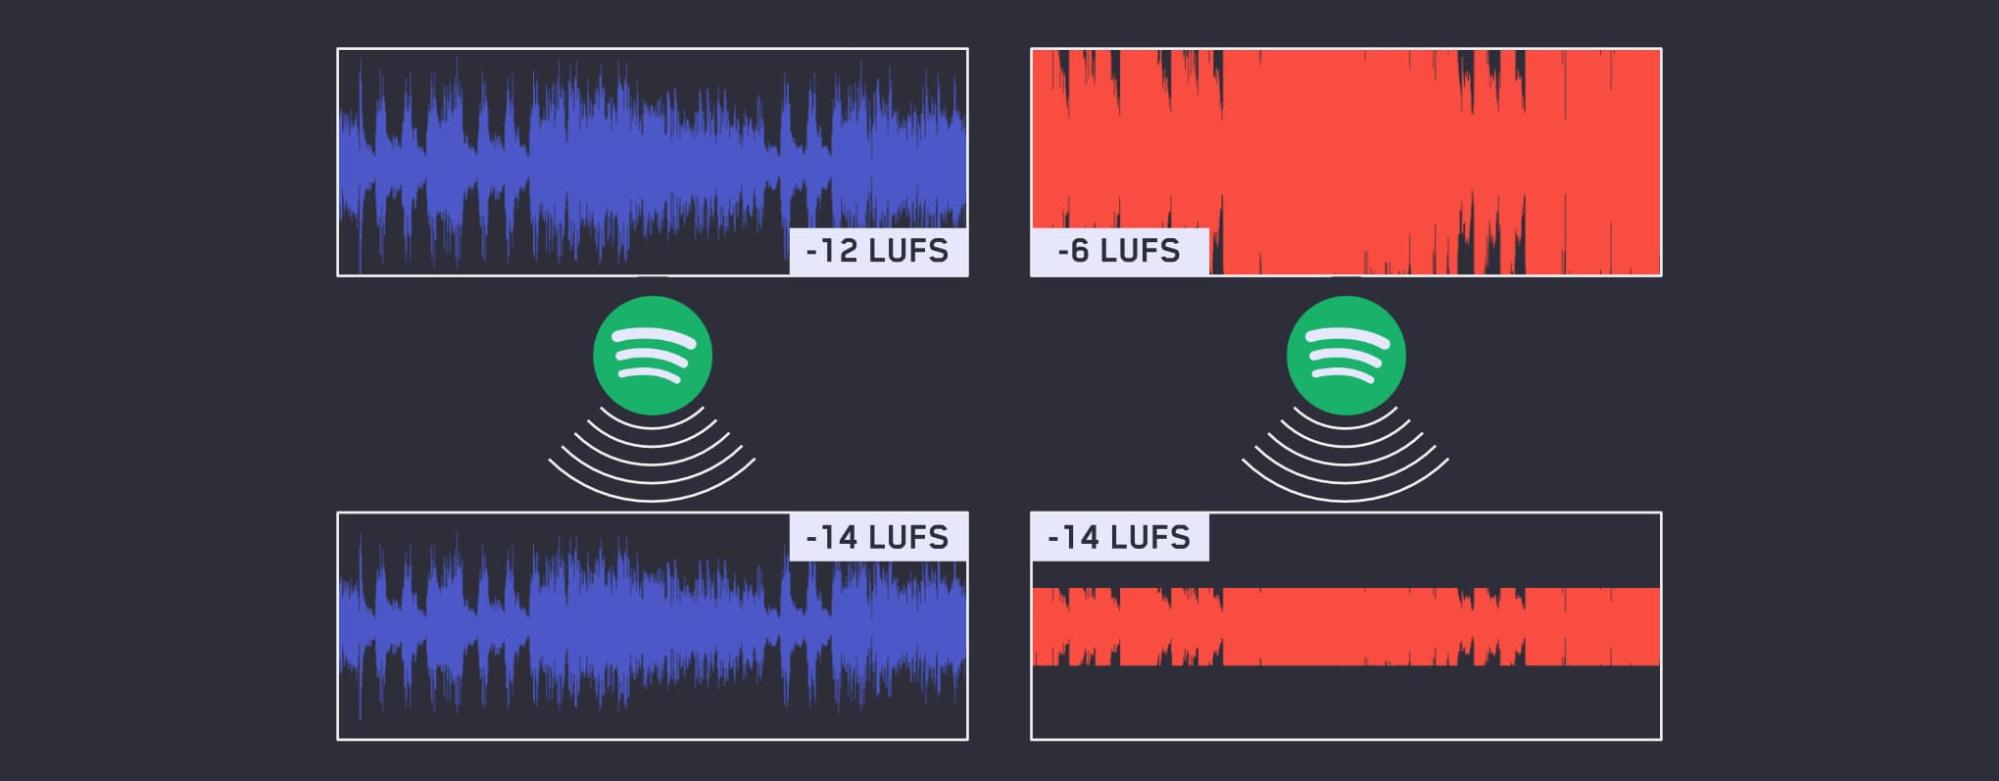 Now that loudness normalization is the default setting for streaming services, the ‘super-loud’ songs have lost their loudness advantage and the flaws caused by over-limiting are obvious when compared to their more dynamic counterparts.